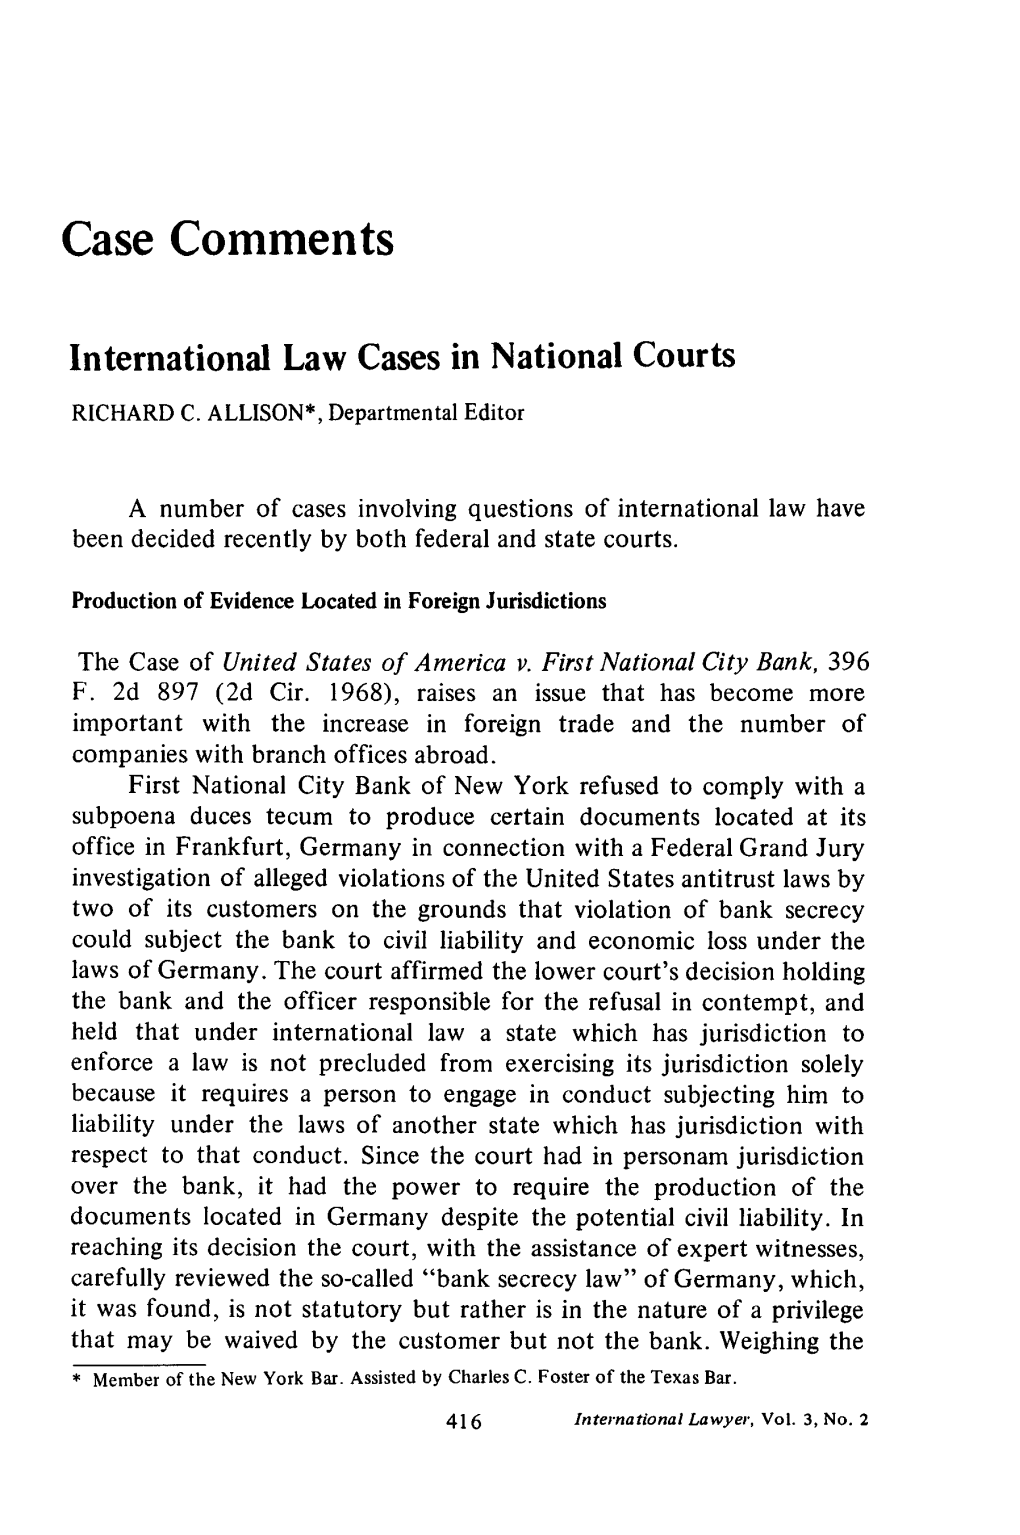 International Law Cases in National Courts